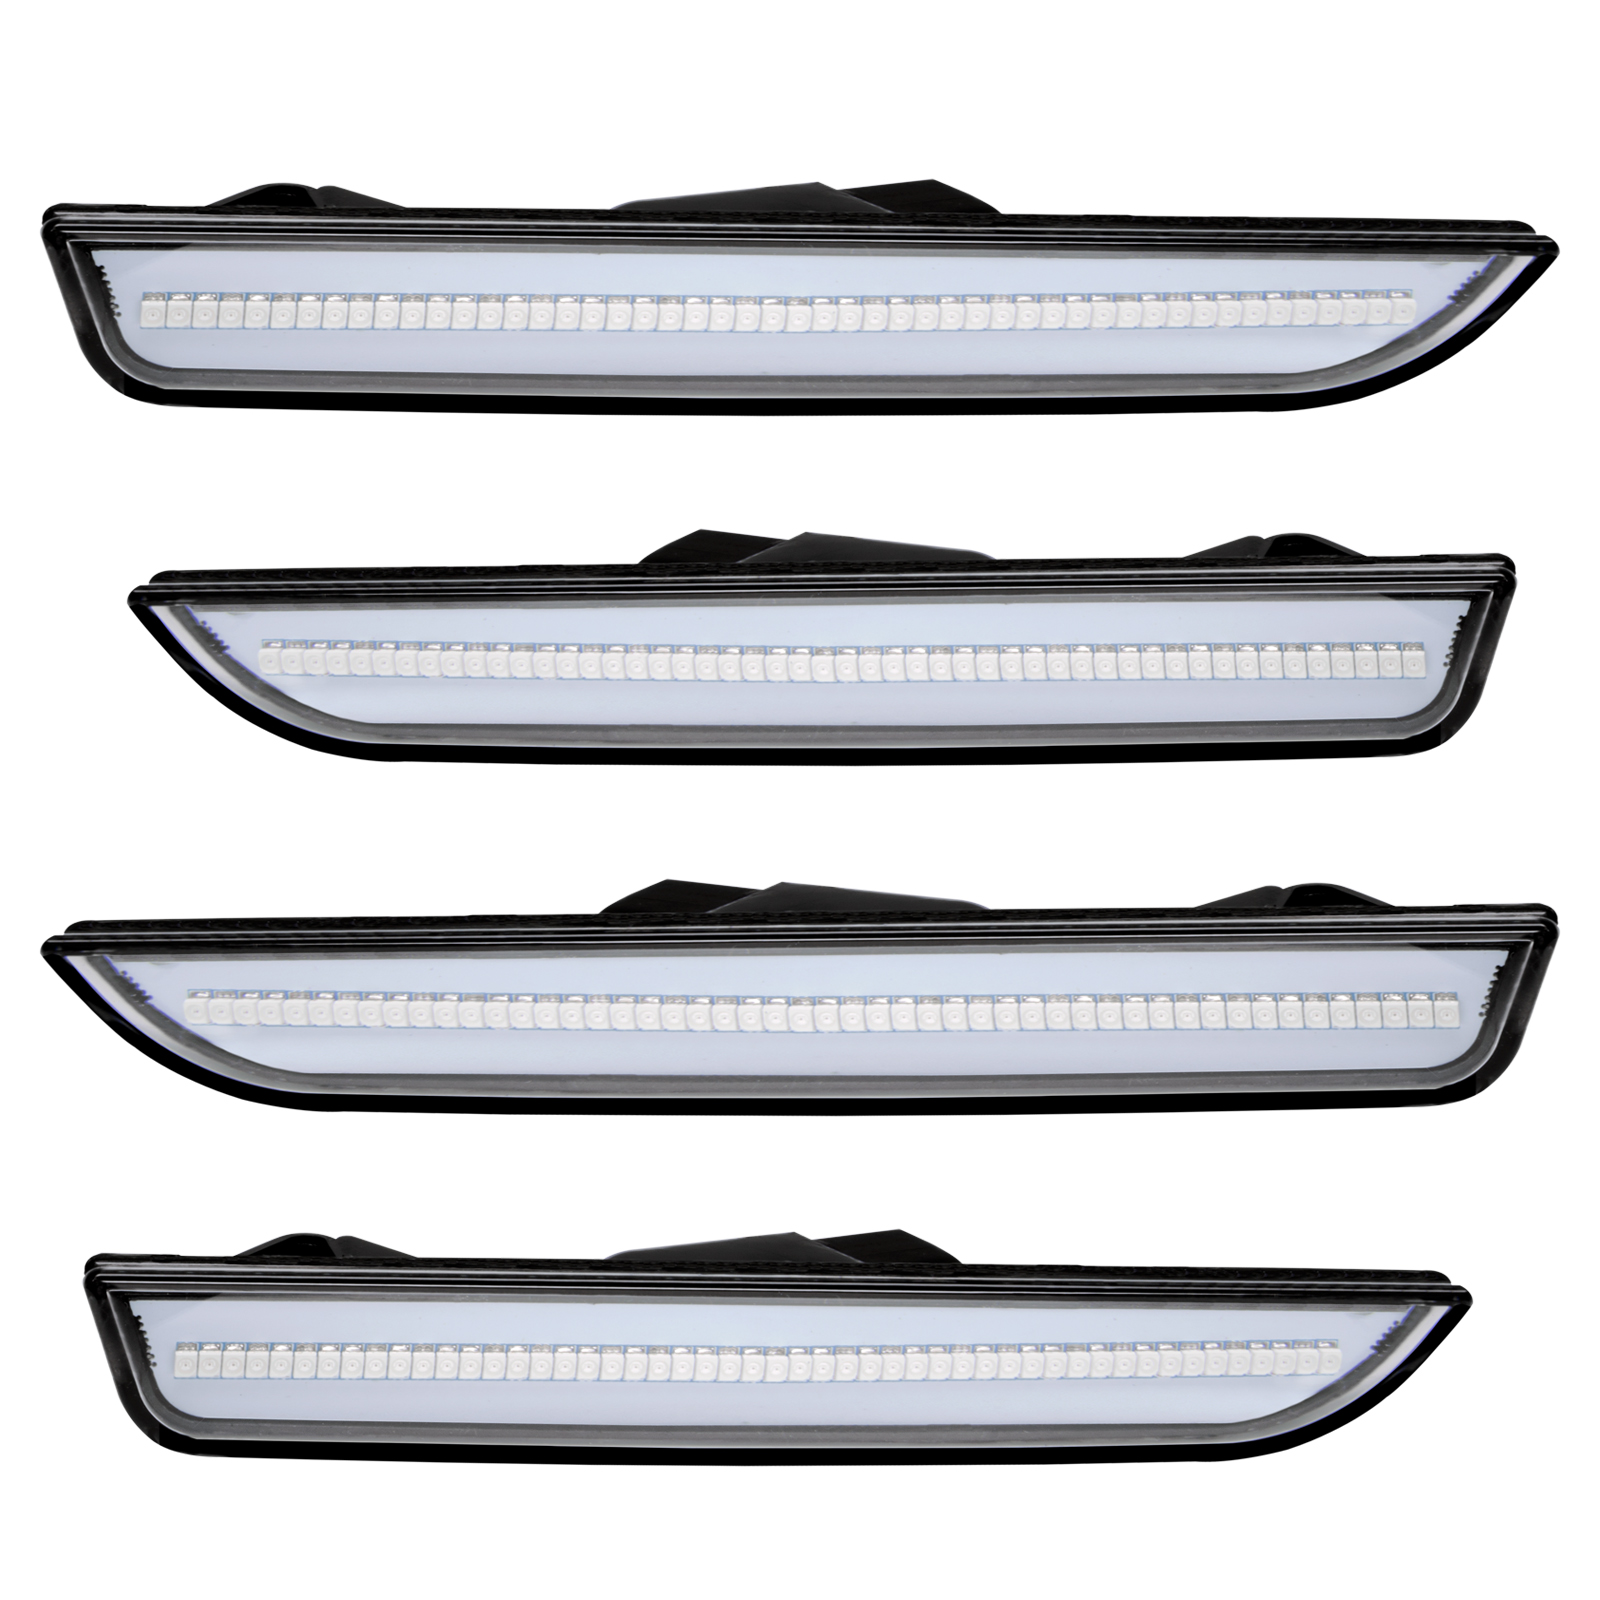 Show details for Oracle Lighting 9700UXC Concept Sidemarker Set, Clear, Ingot Silver Metallic (ux)